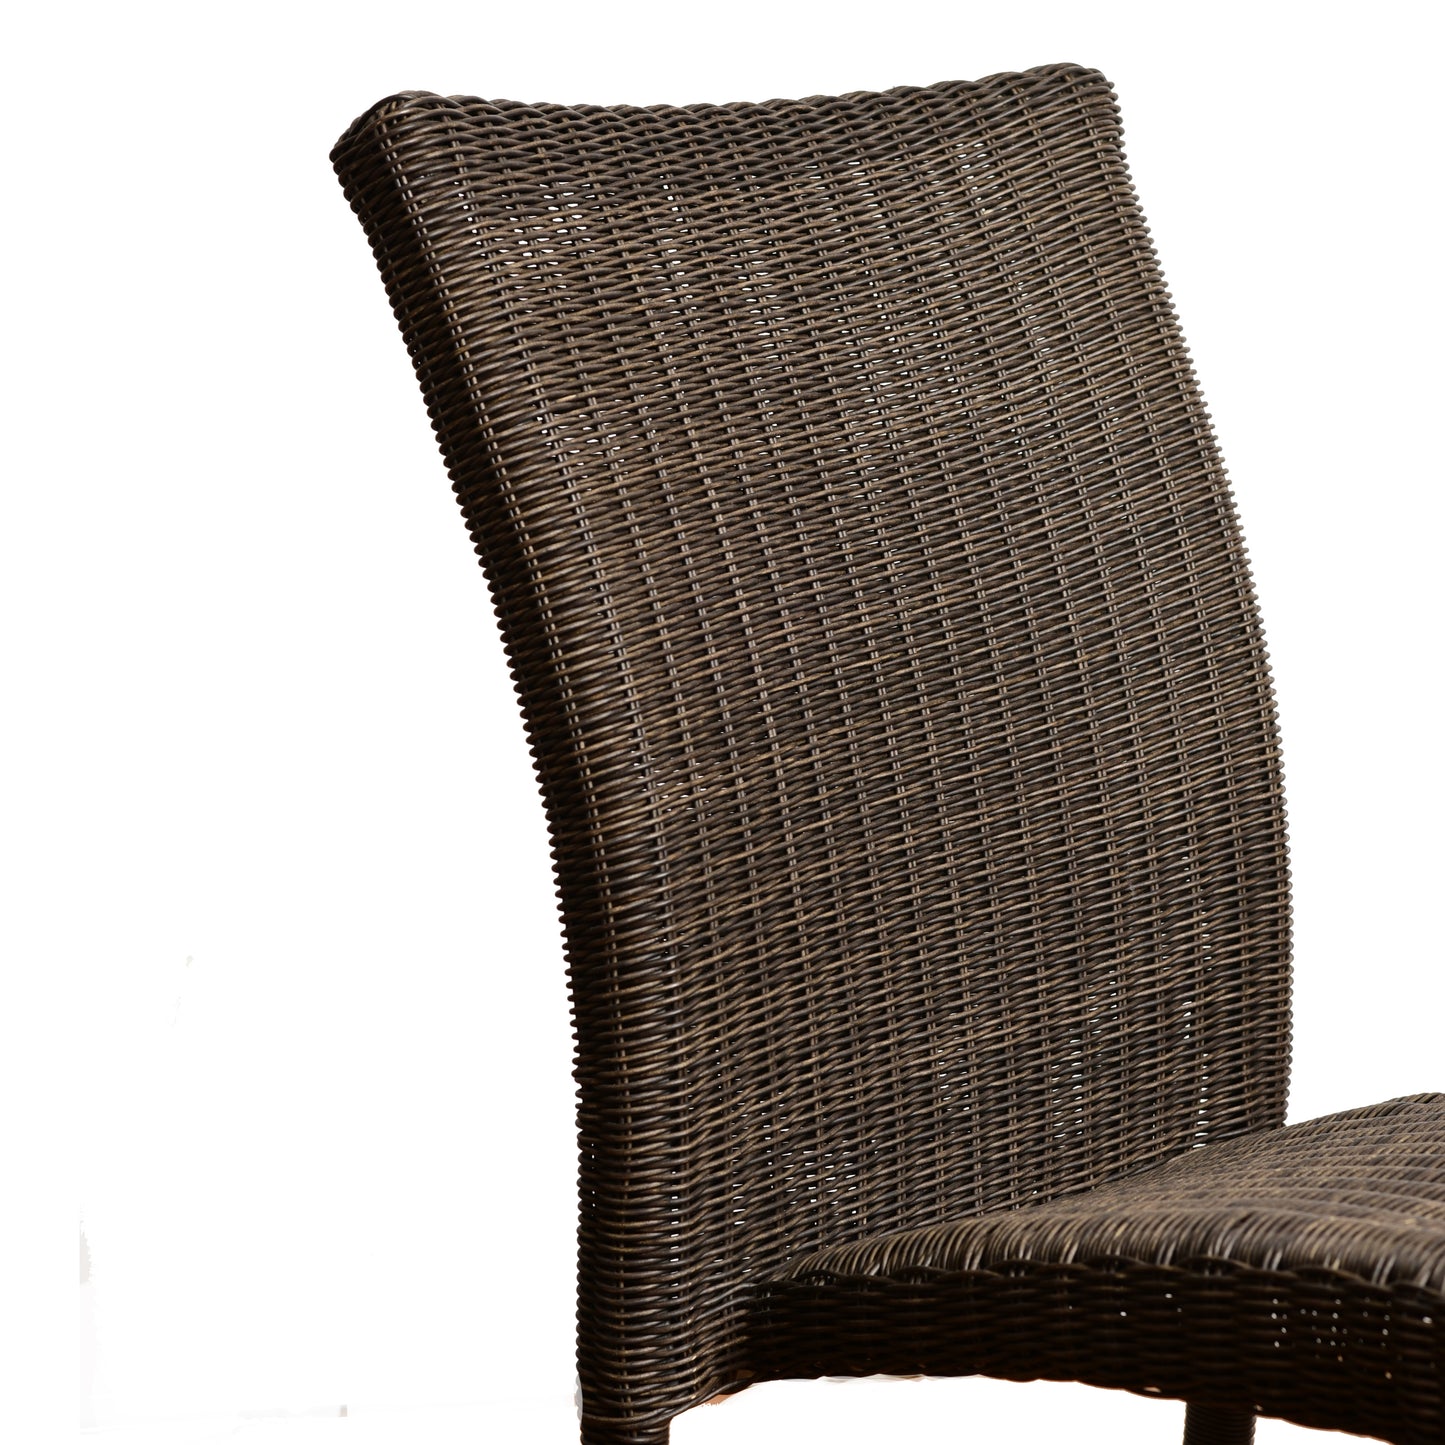 Bari Aluminum and Round Wicker Dining Side Chair